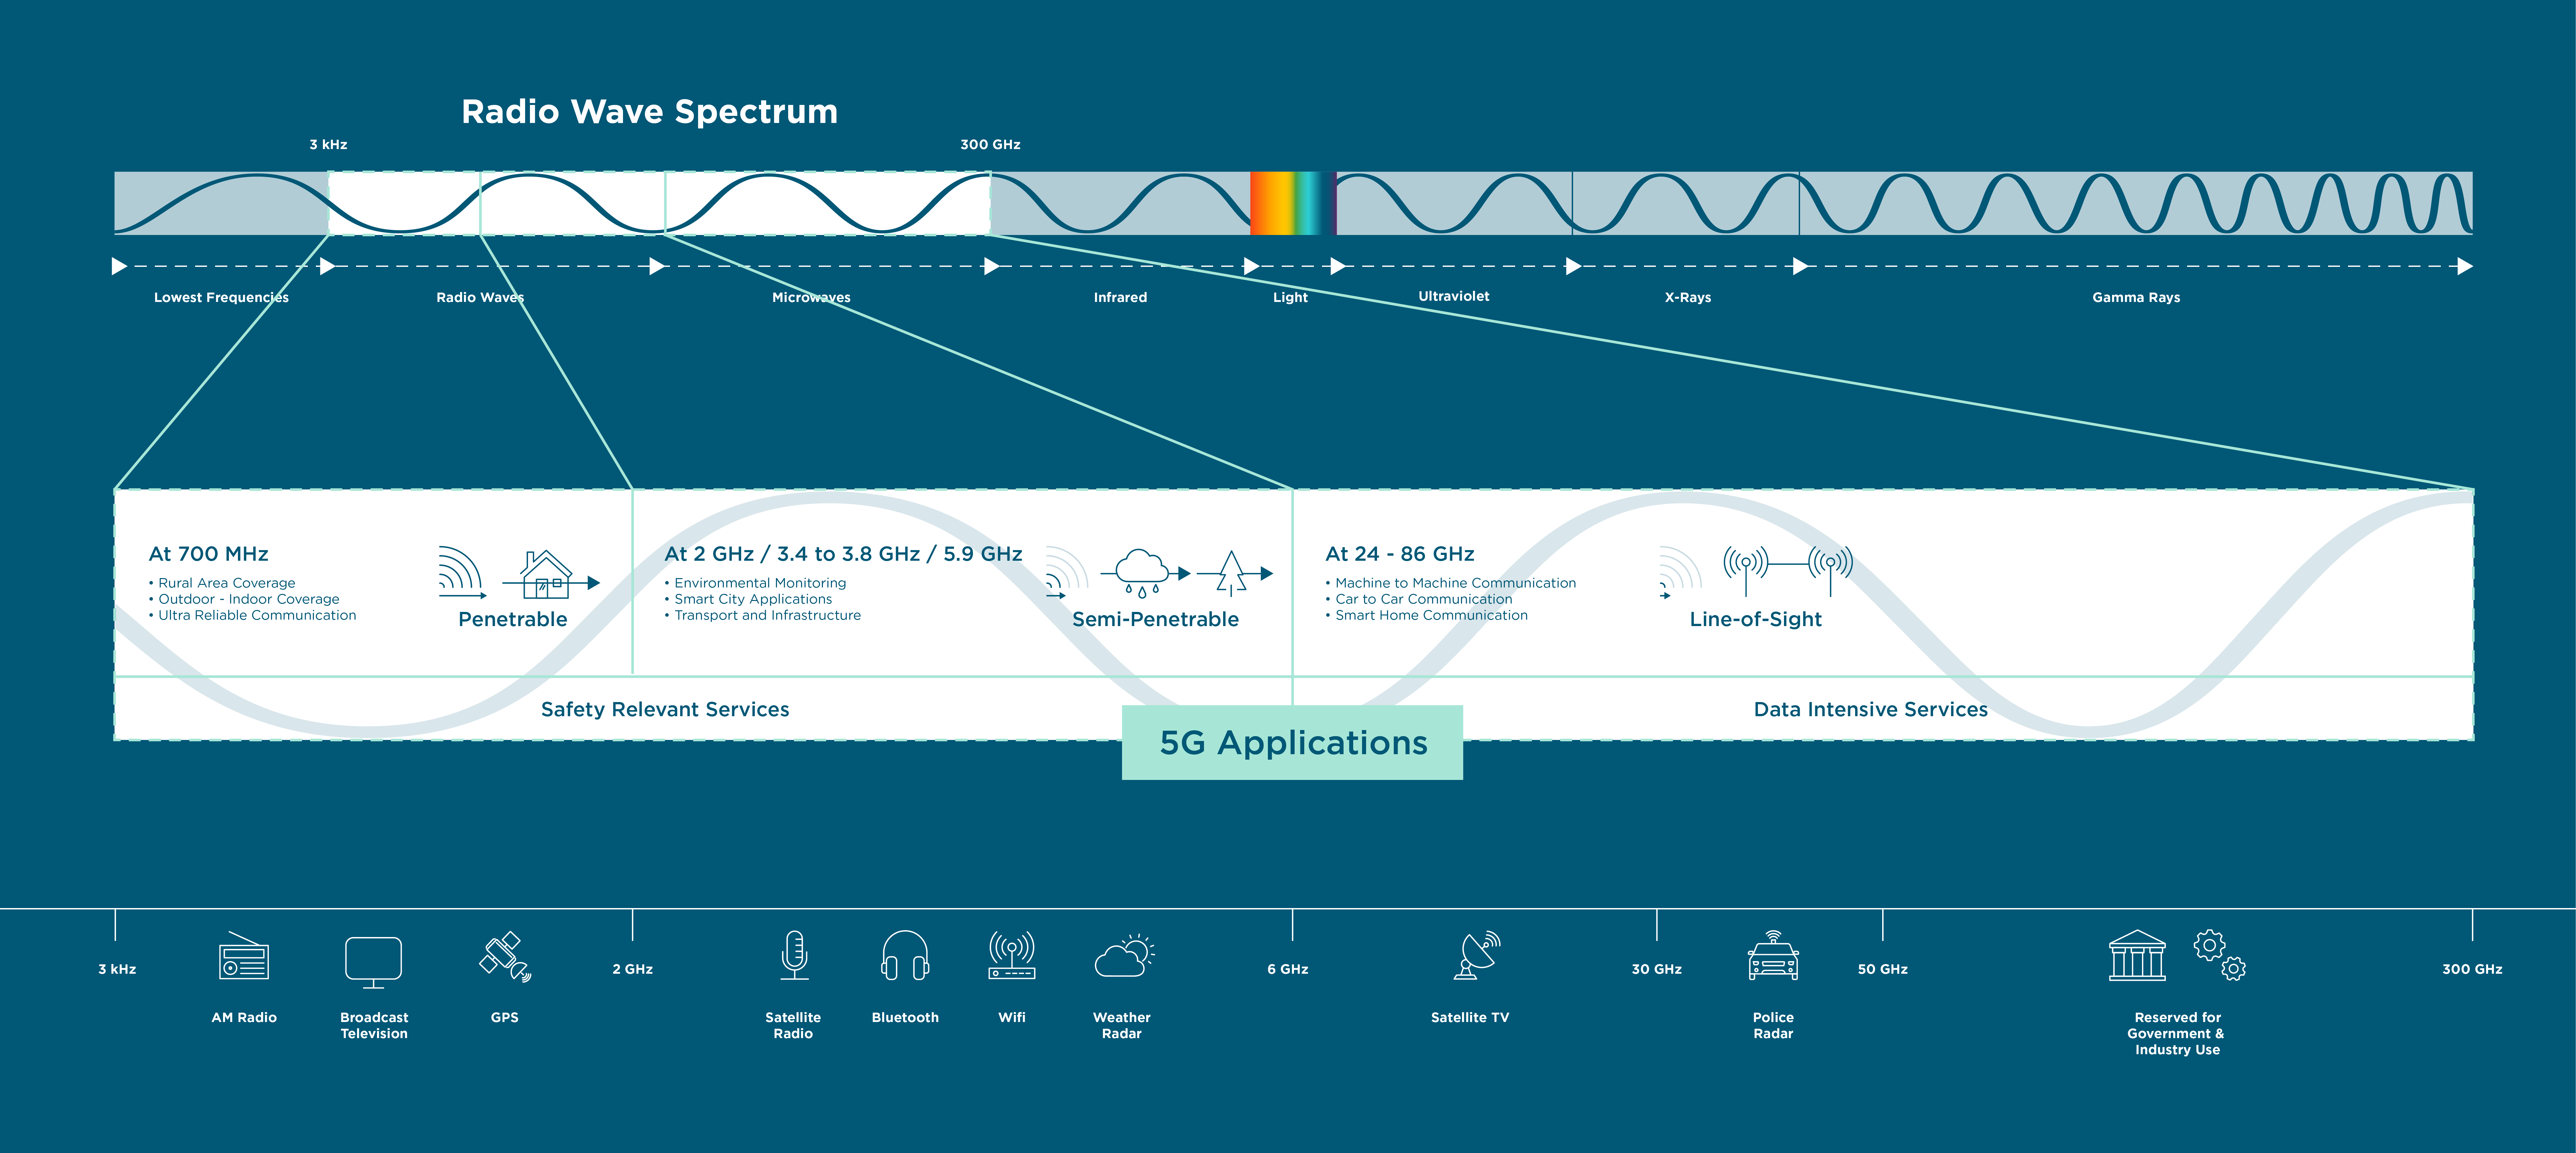 5G info graphic, 5G applications allocated along the Radio Wave Spectrum